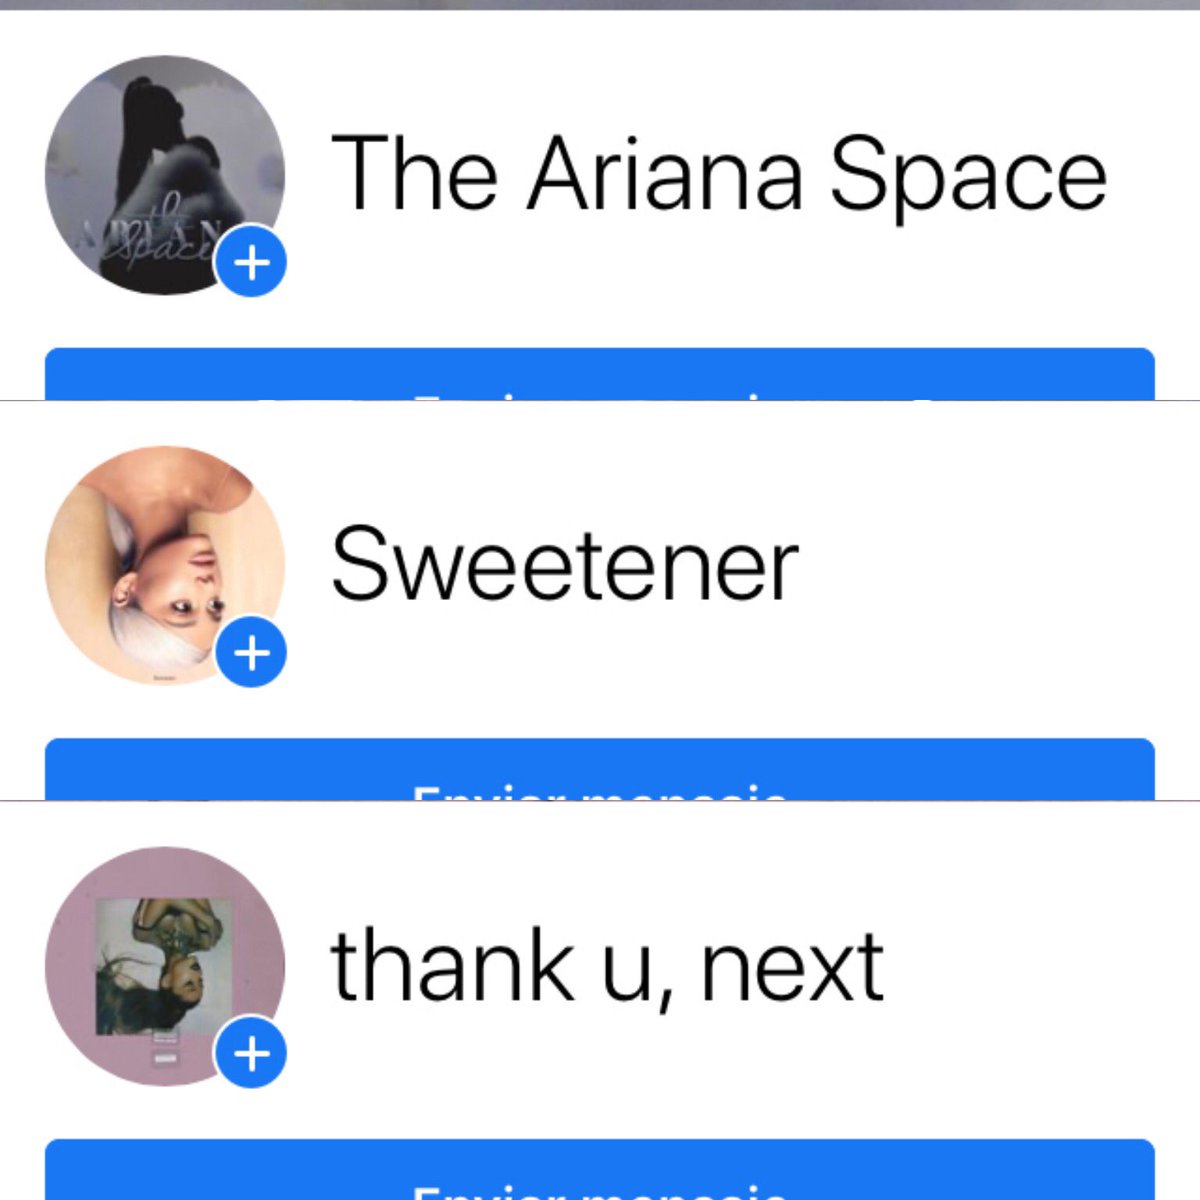 i have 3 facebook page, one of the 3 is call “The Ariana Space” and i made this thread in july but in spanish this is a english version, the spanish version is here:  https://www.facebook.com/media/set/?set=a.2073730229595324&type=3